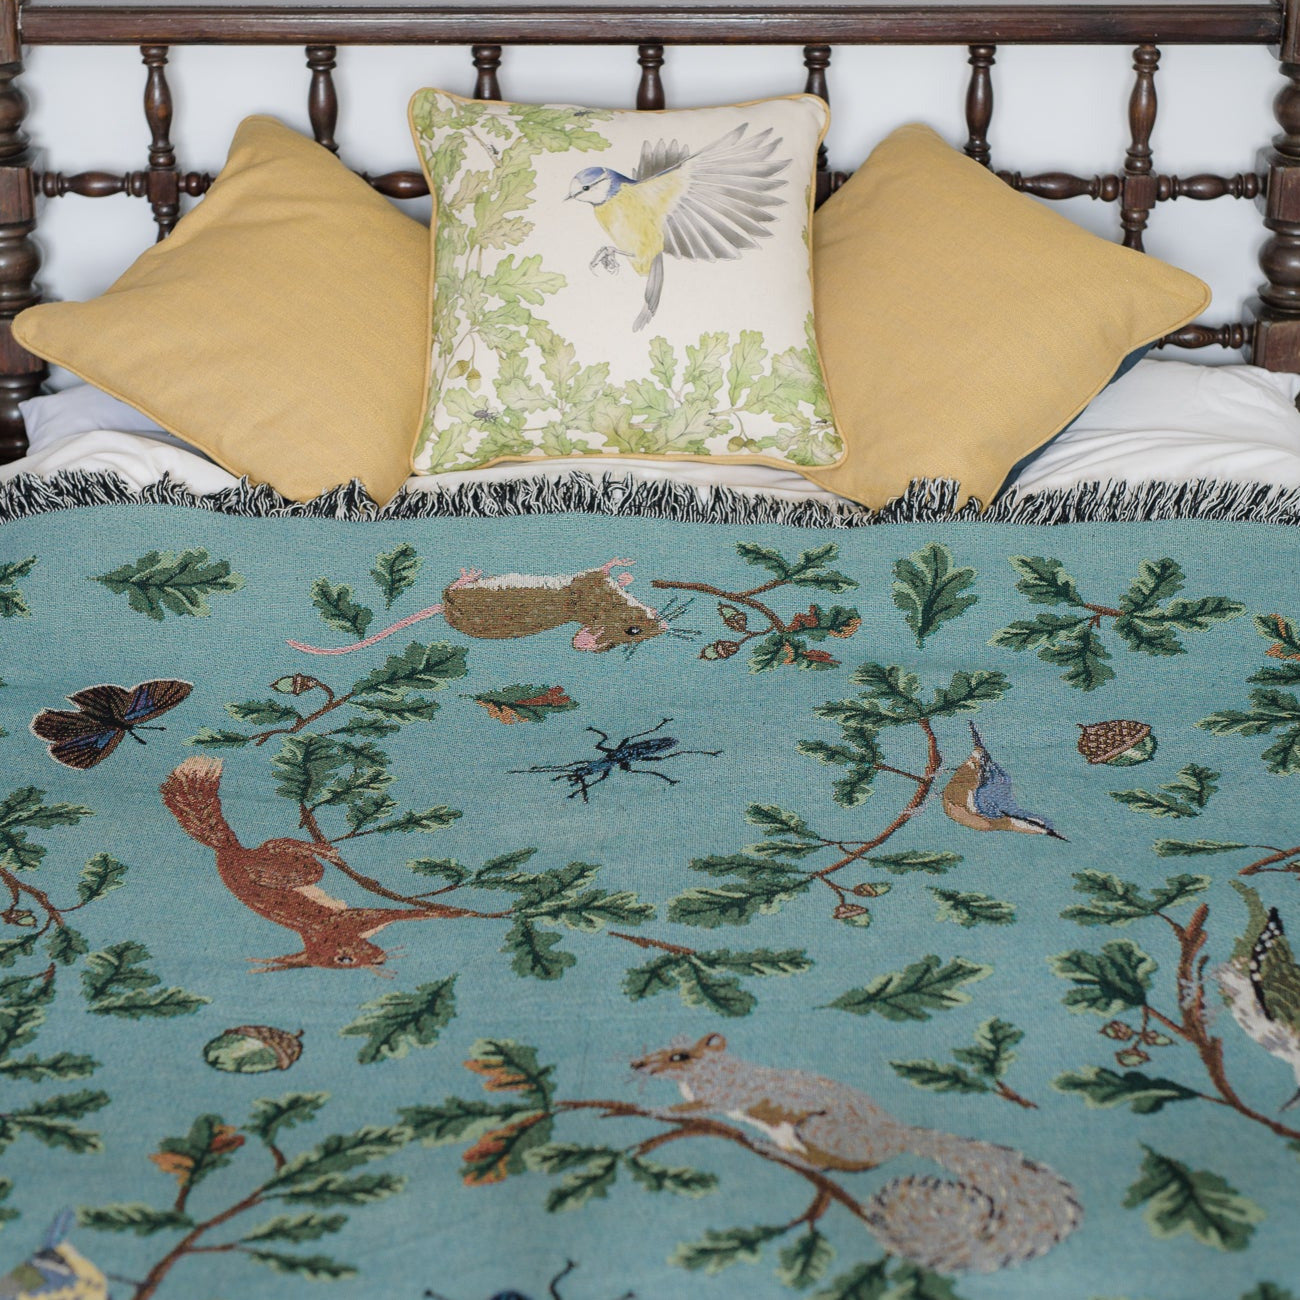 Jade woven blanket spread across bed with red squirrel, oak, butterflies and birds pattern